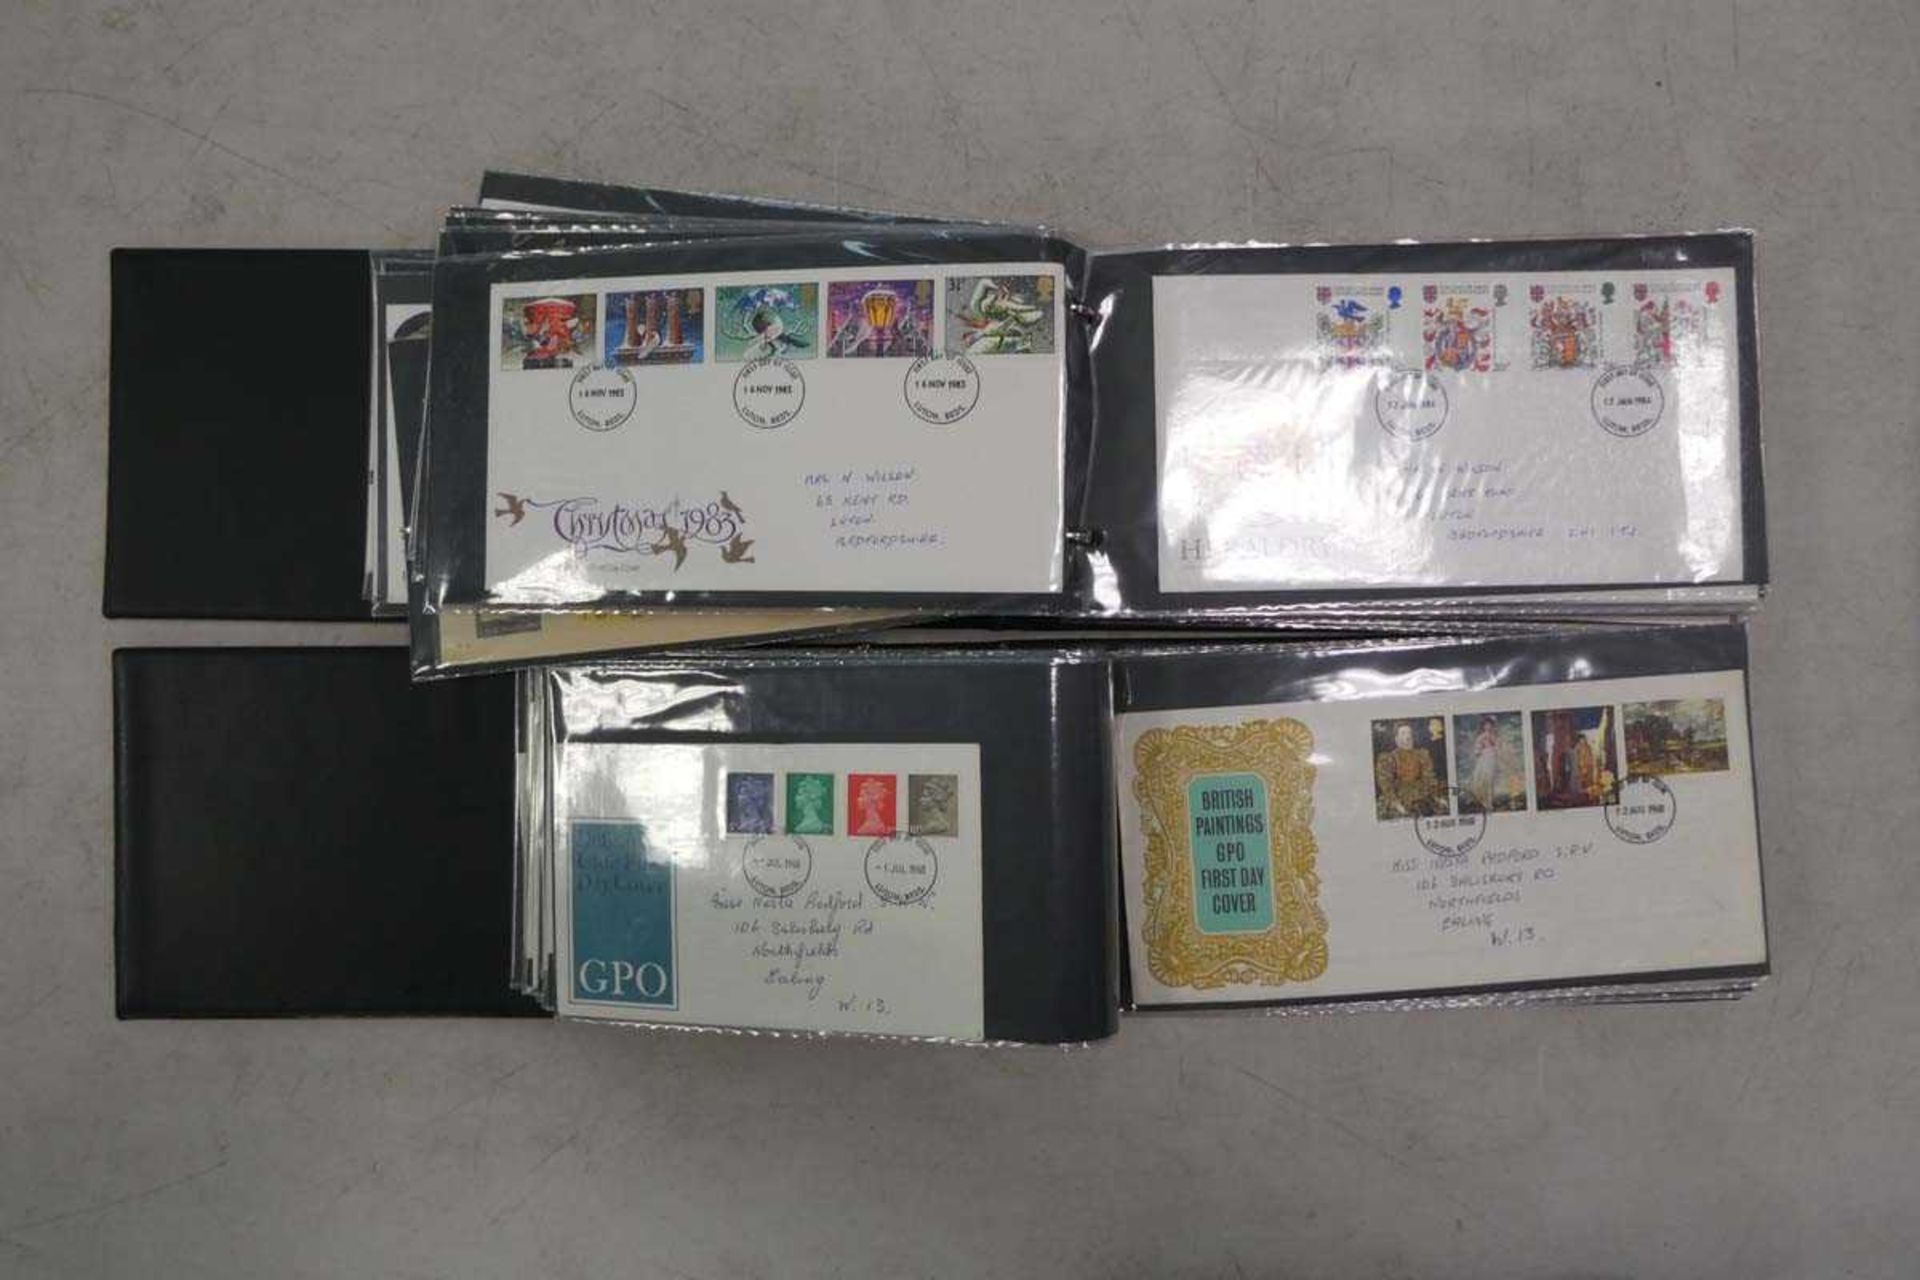 Tray containing wide selection of first day covers in albums